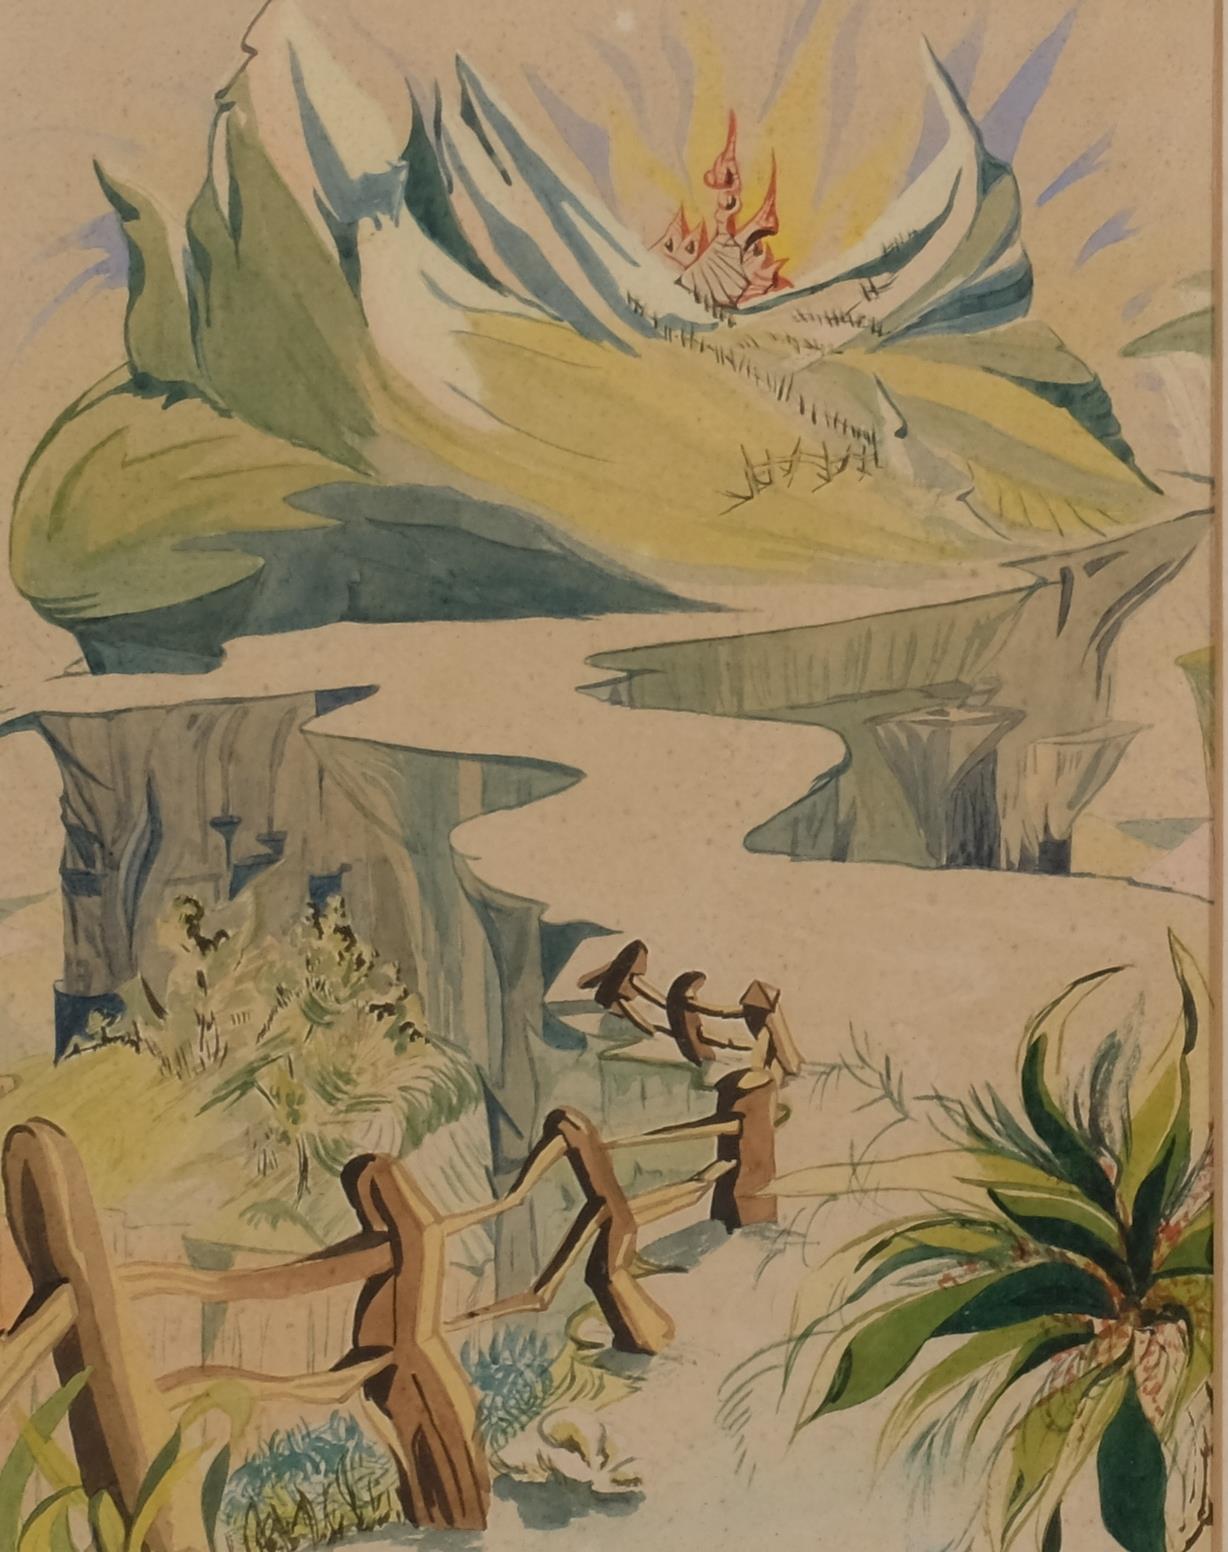 Tanci Bristol (1912 - 2006), 2 mid-century fantasy landscapes, probably illustrations, watercolours, - Image 2 of 4